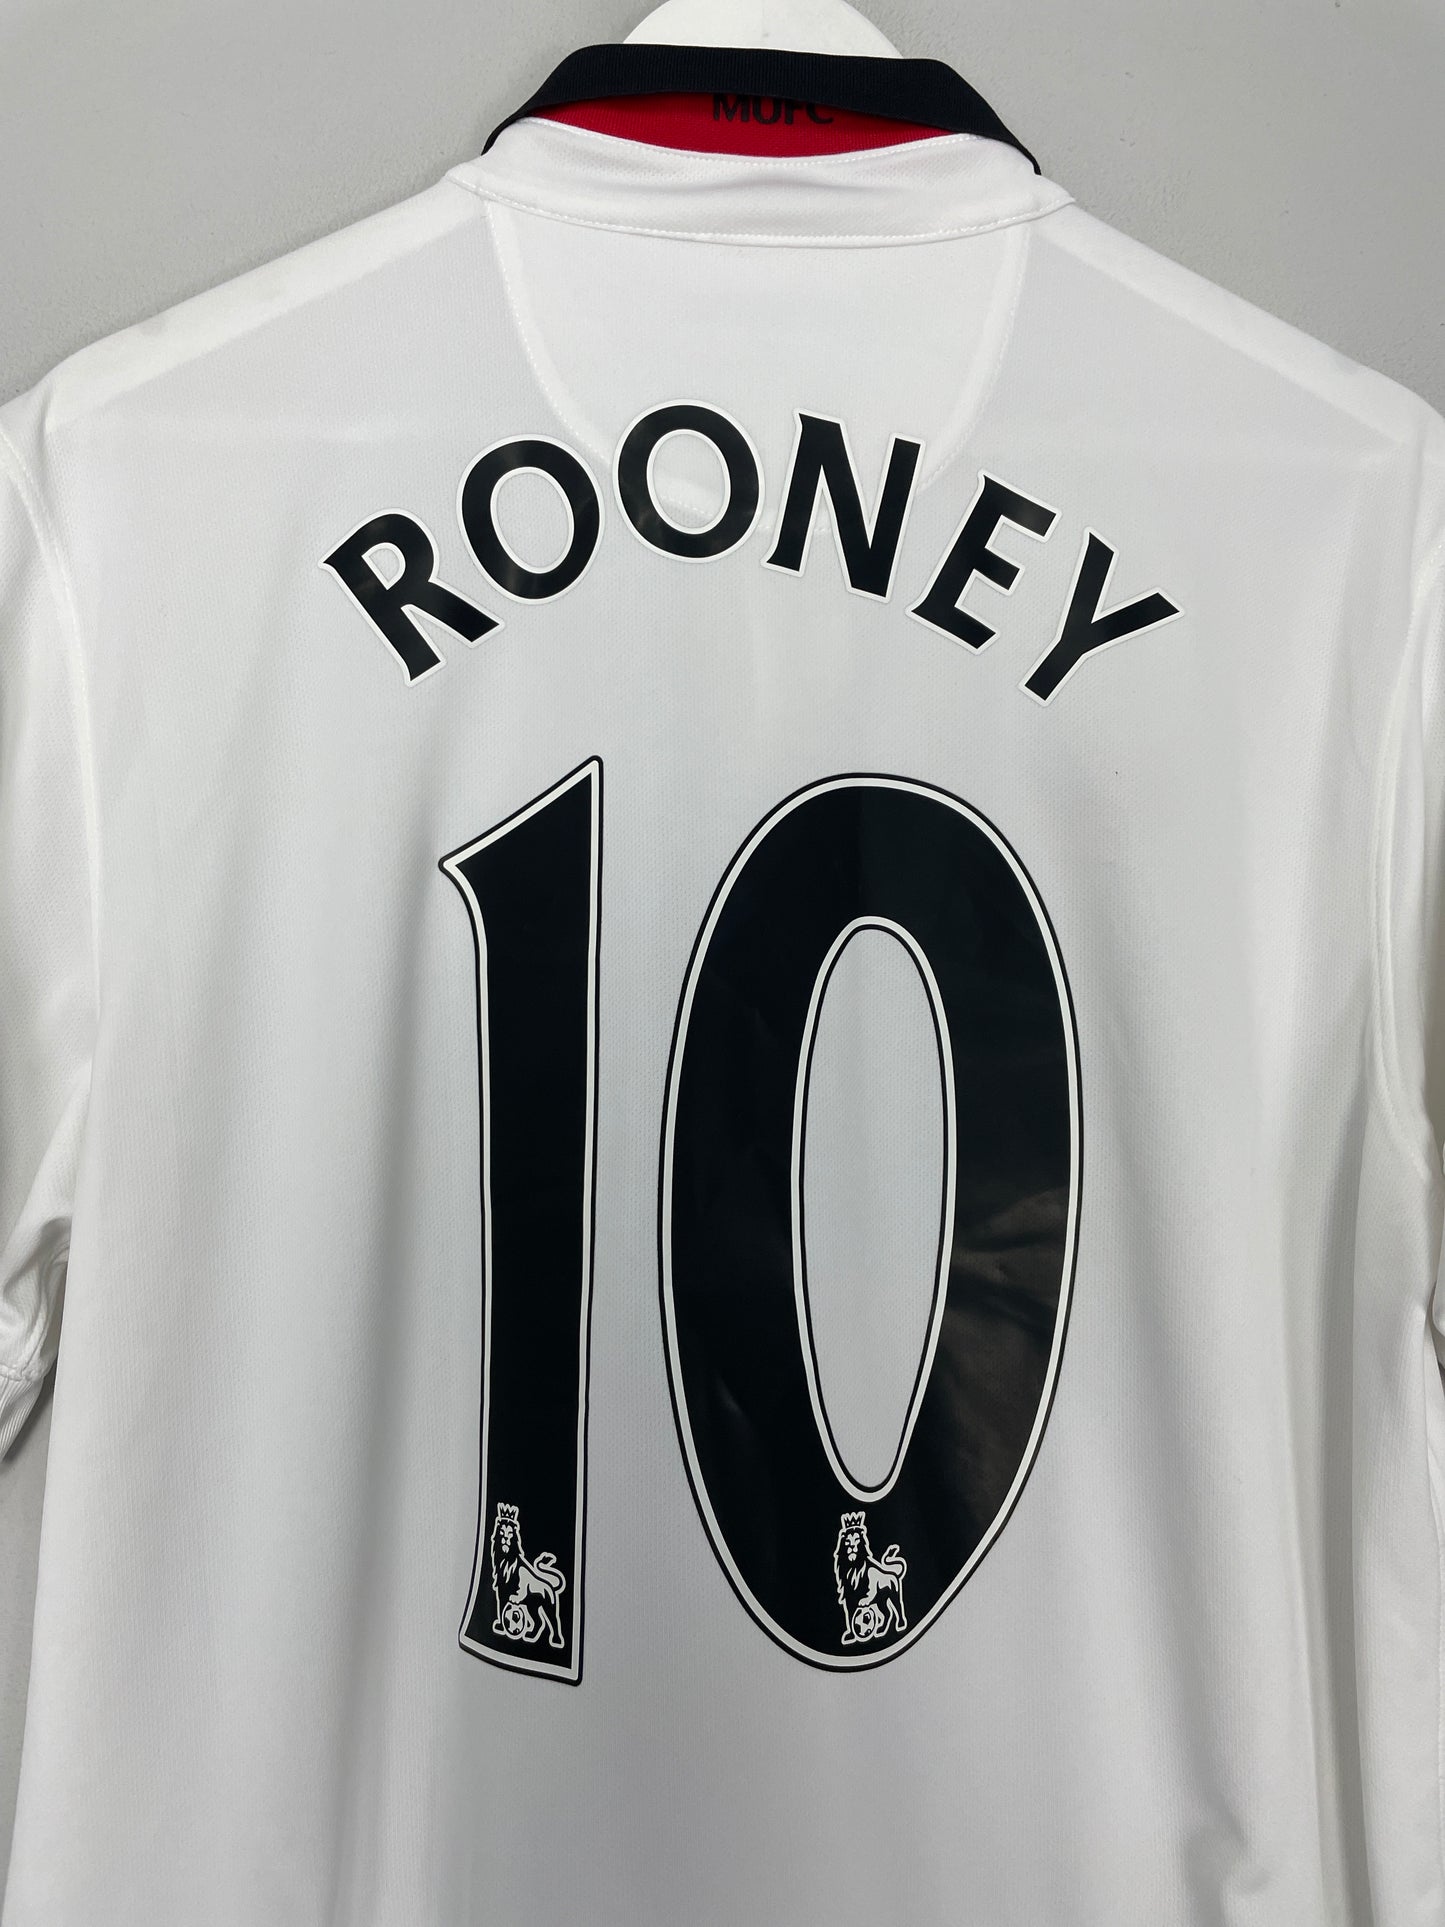 2014/15 MANCHESTER UNITED ROONEY #10 AWAY SHIRT (L) NIKE